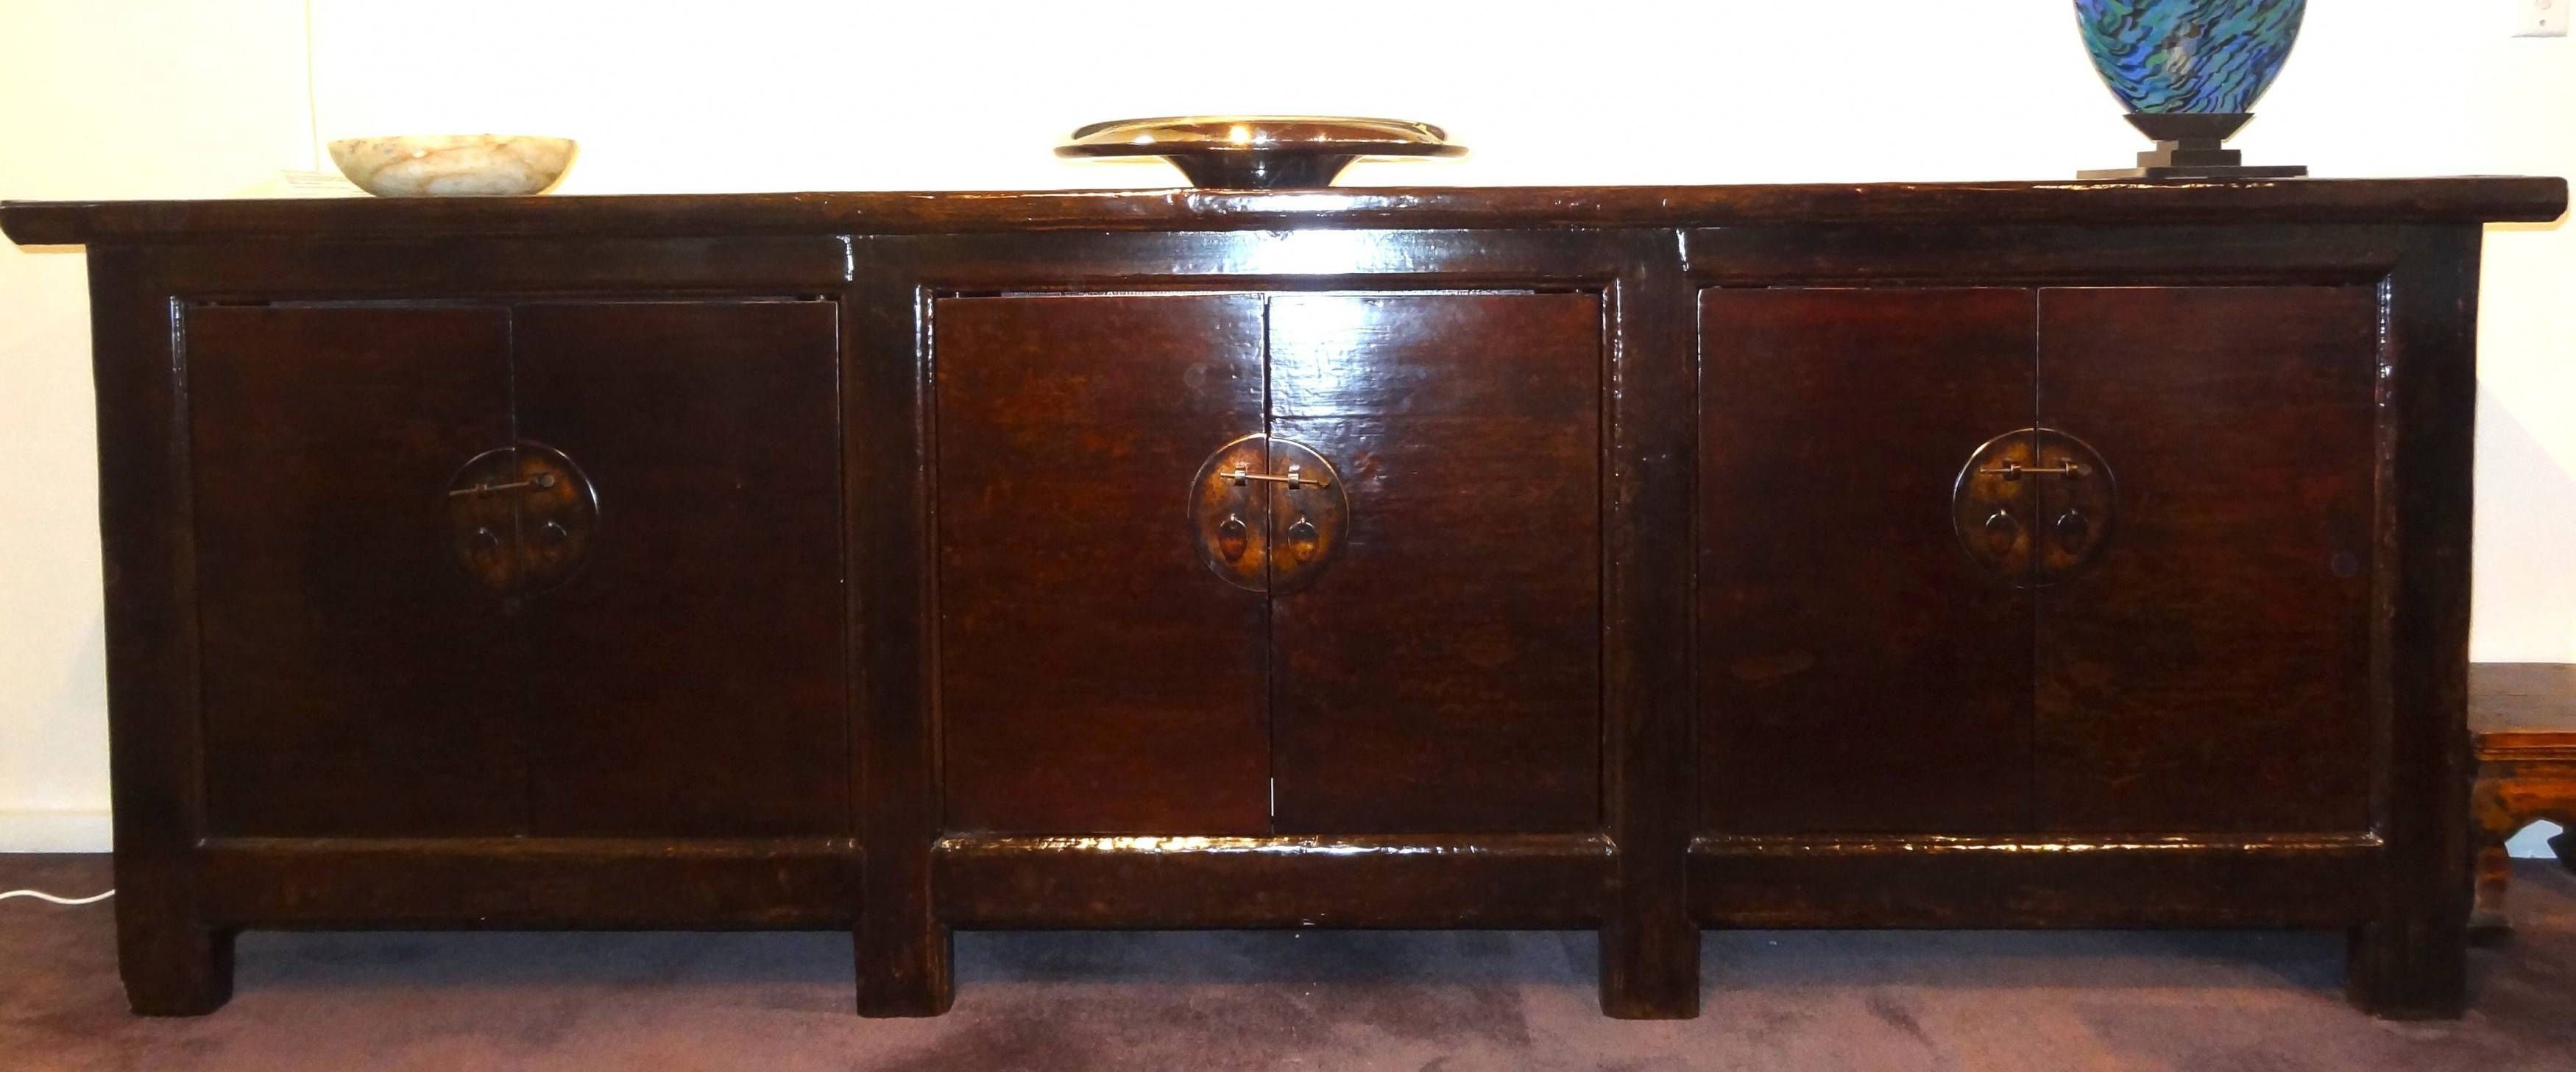 Antique Sideboards | Gallery Categories | Aptos Cruz Intended For Chinese Sideboards (View 9 of 20)